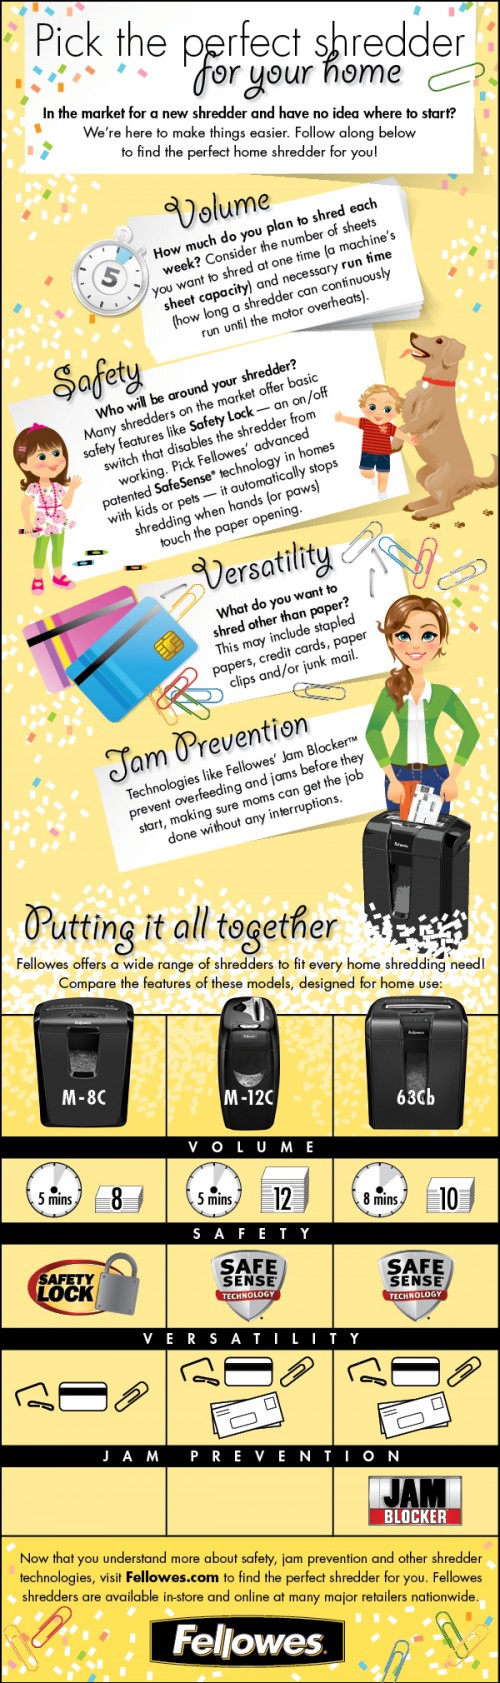 Fellowes Infographic